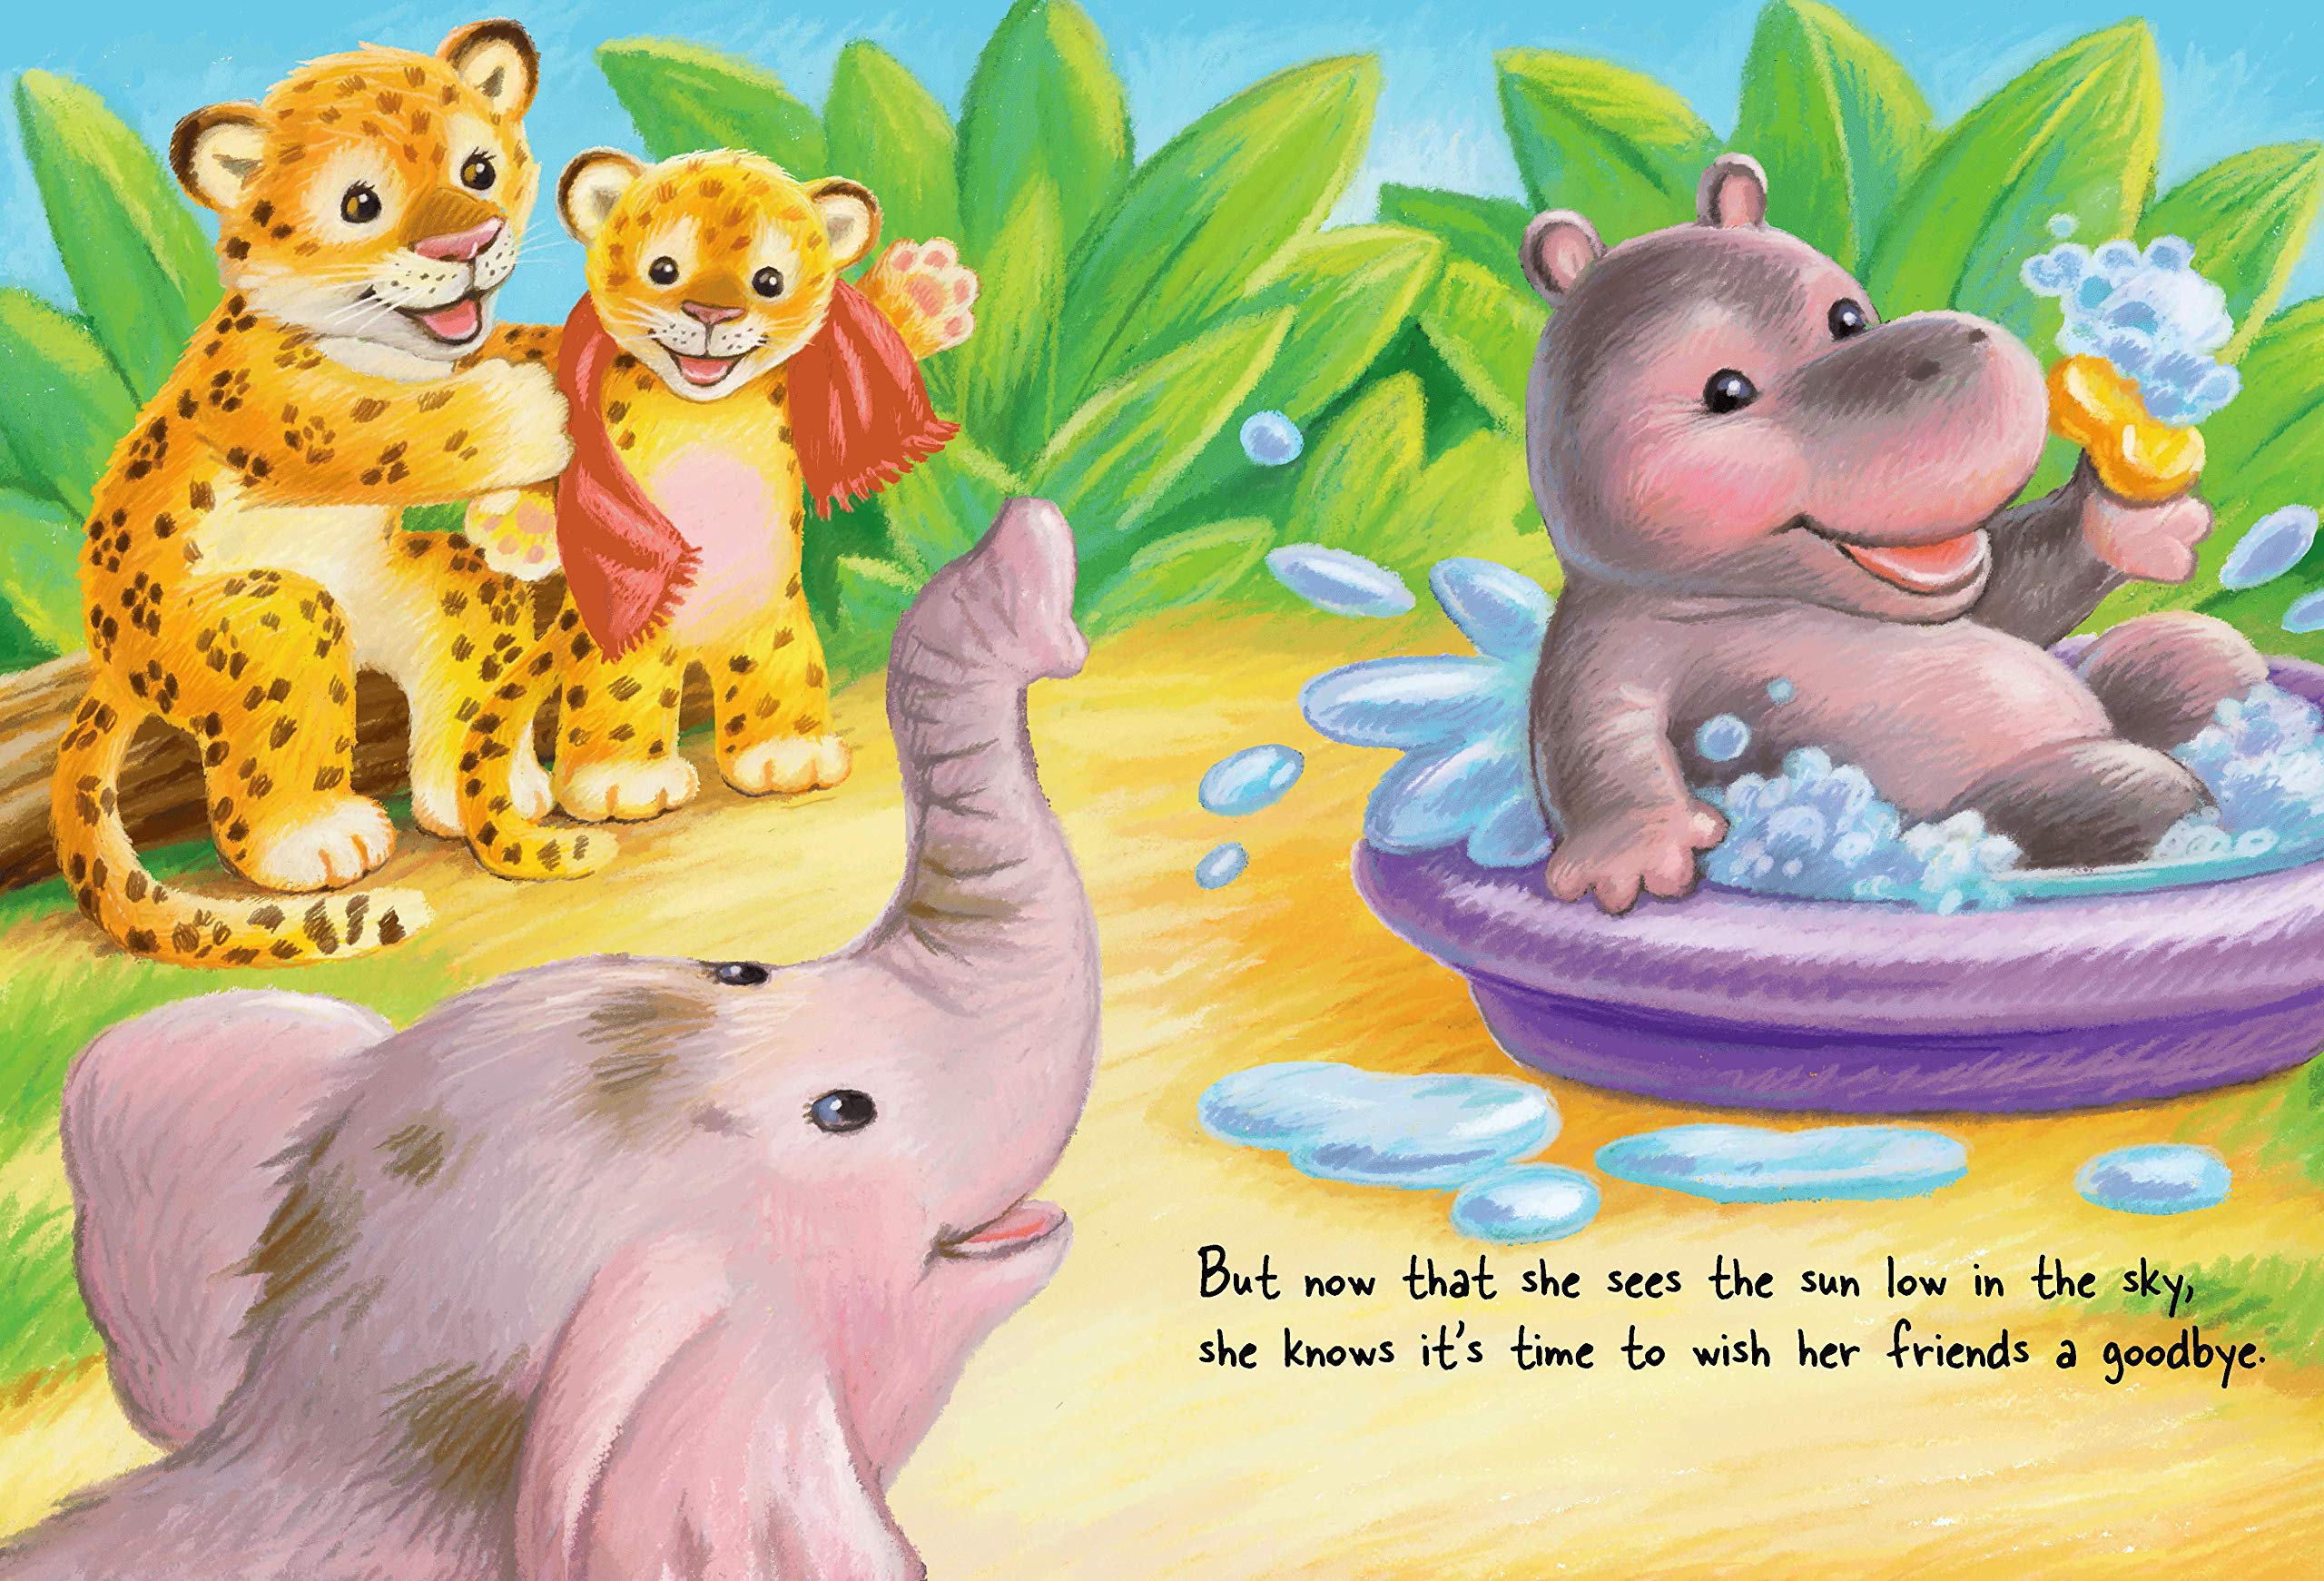 It's Bath Time - Children's Padded Board Book - Bedtime Story